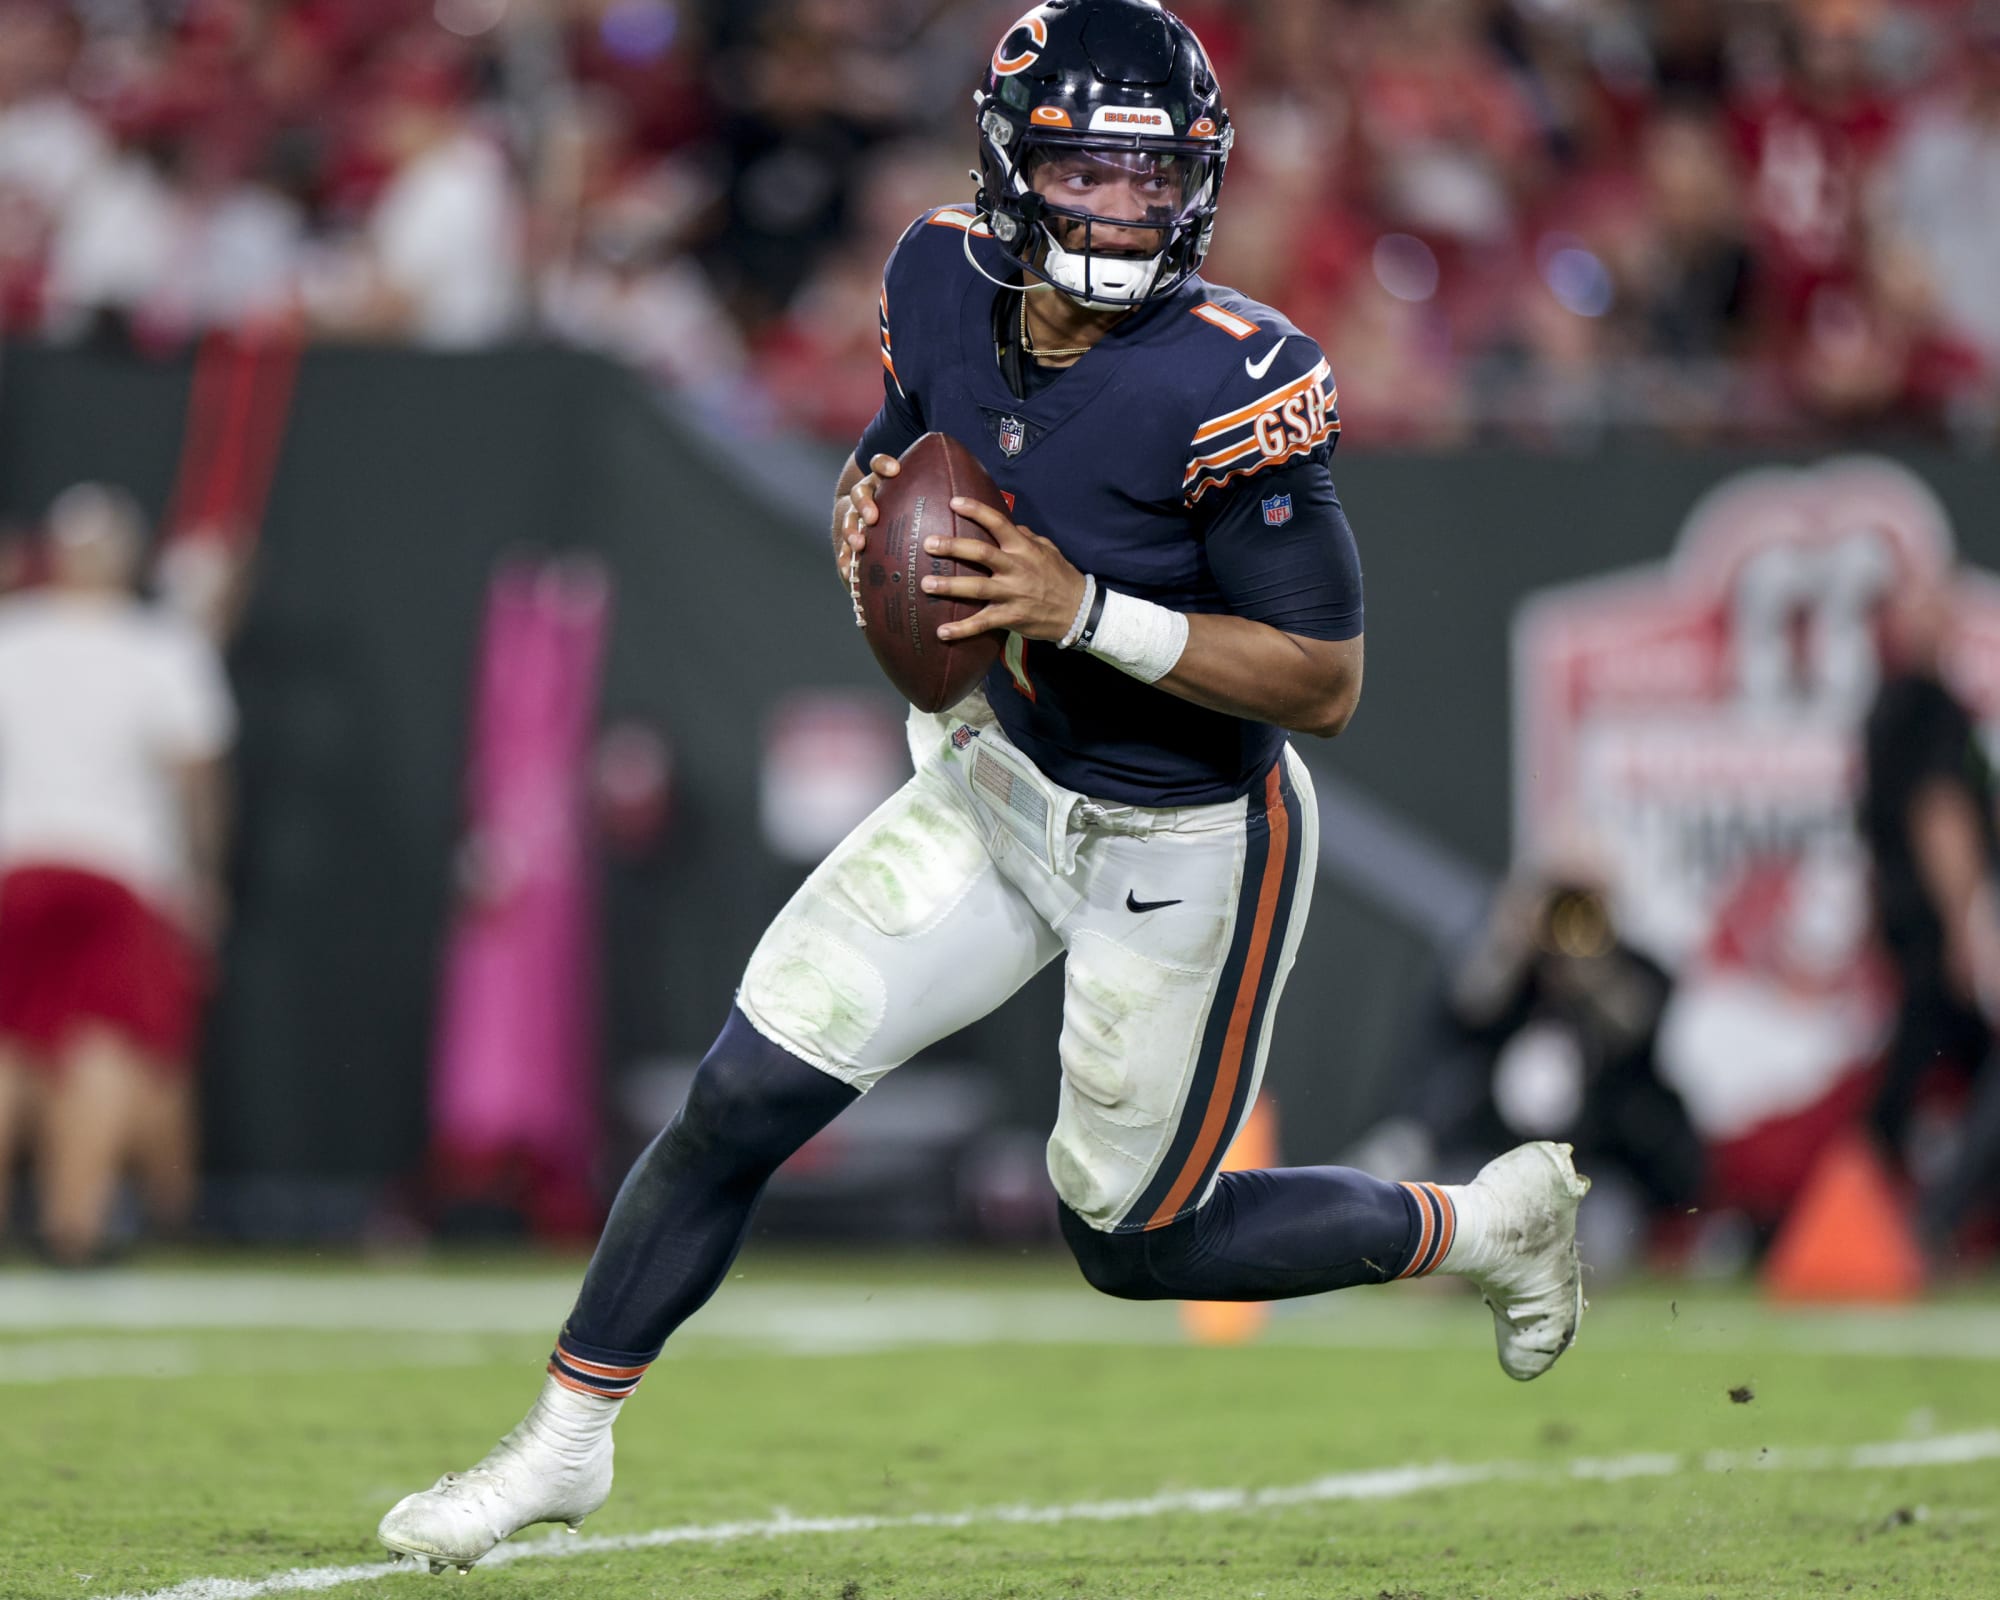 This key could unlock the Chicago Bears potential on offense